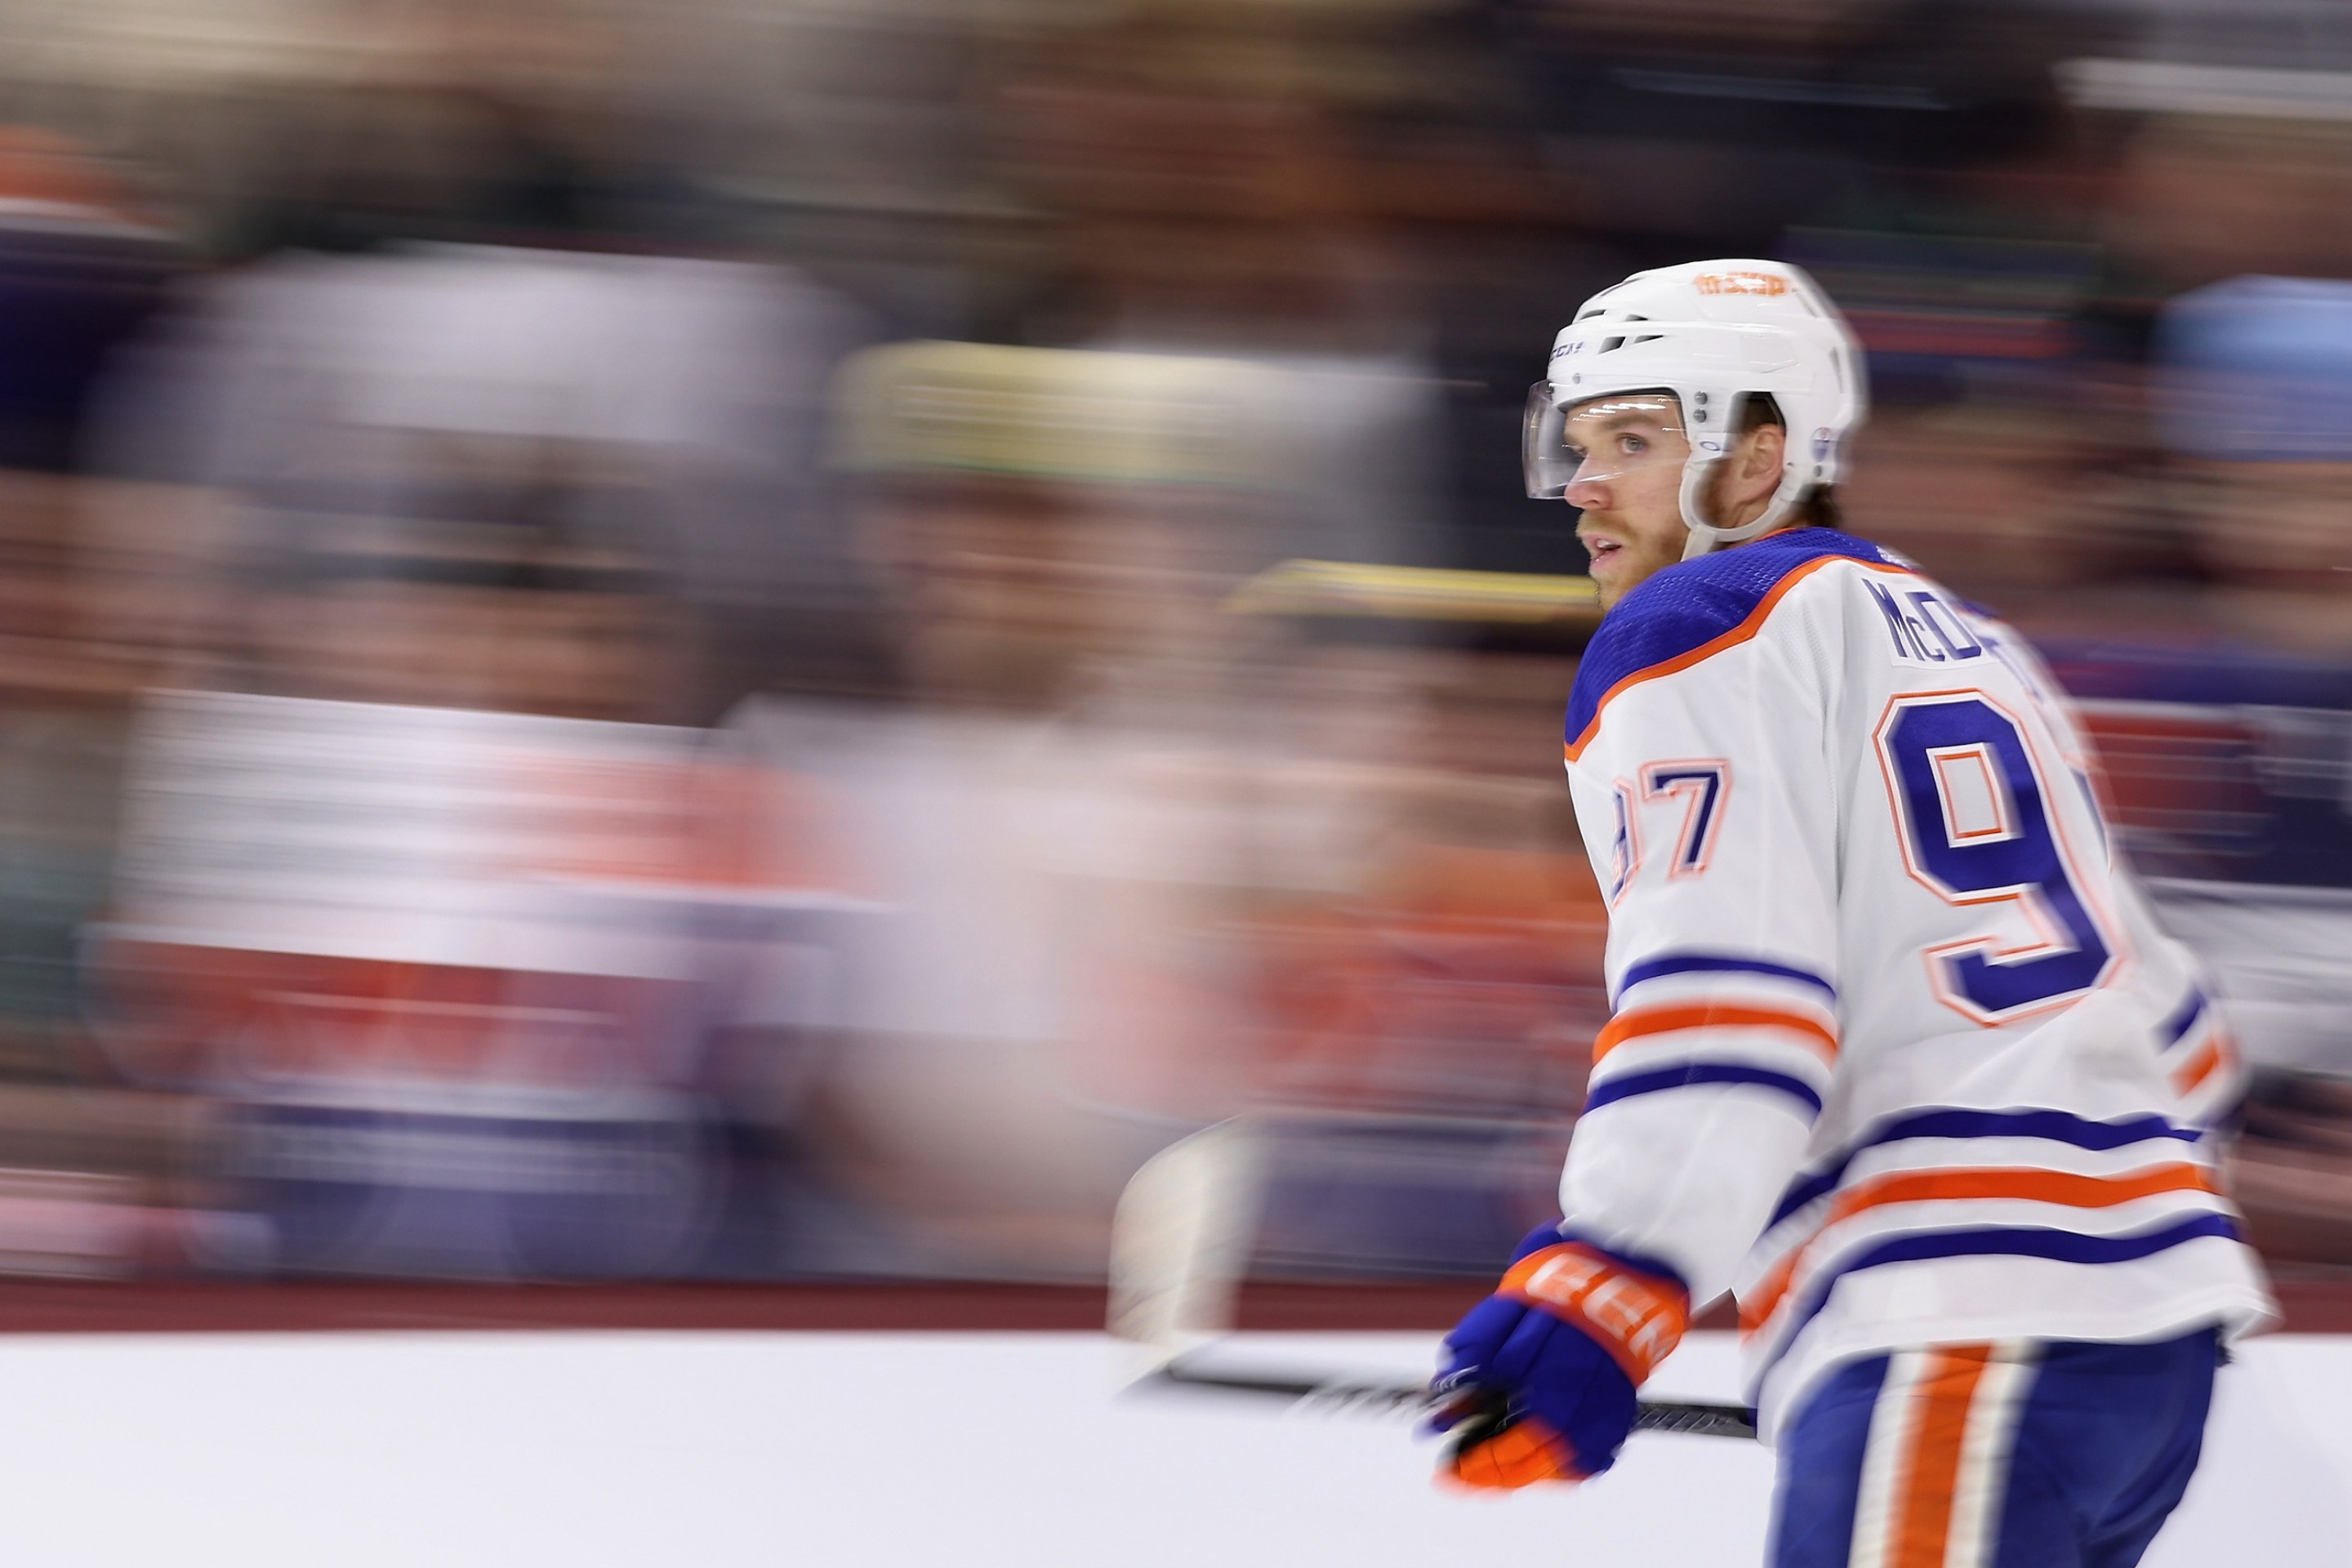 TEMPE, ARIZONA - MARCH 27: Connor McDavid #97 of the Edmonton Oilers warms up before he NHL game against the Arizona Coyotes at Mullett Arena on March 27, 2023 in Tempe, Arizona. (Photo by Christian Petersen/Getty Images)